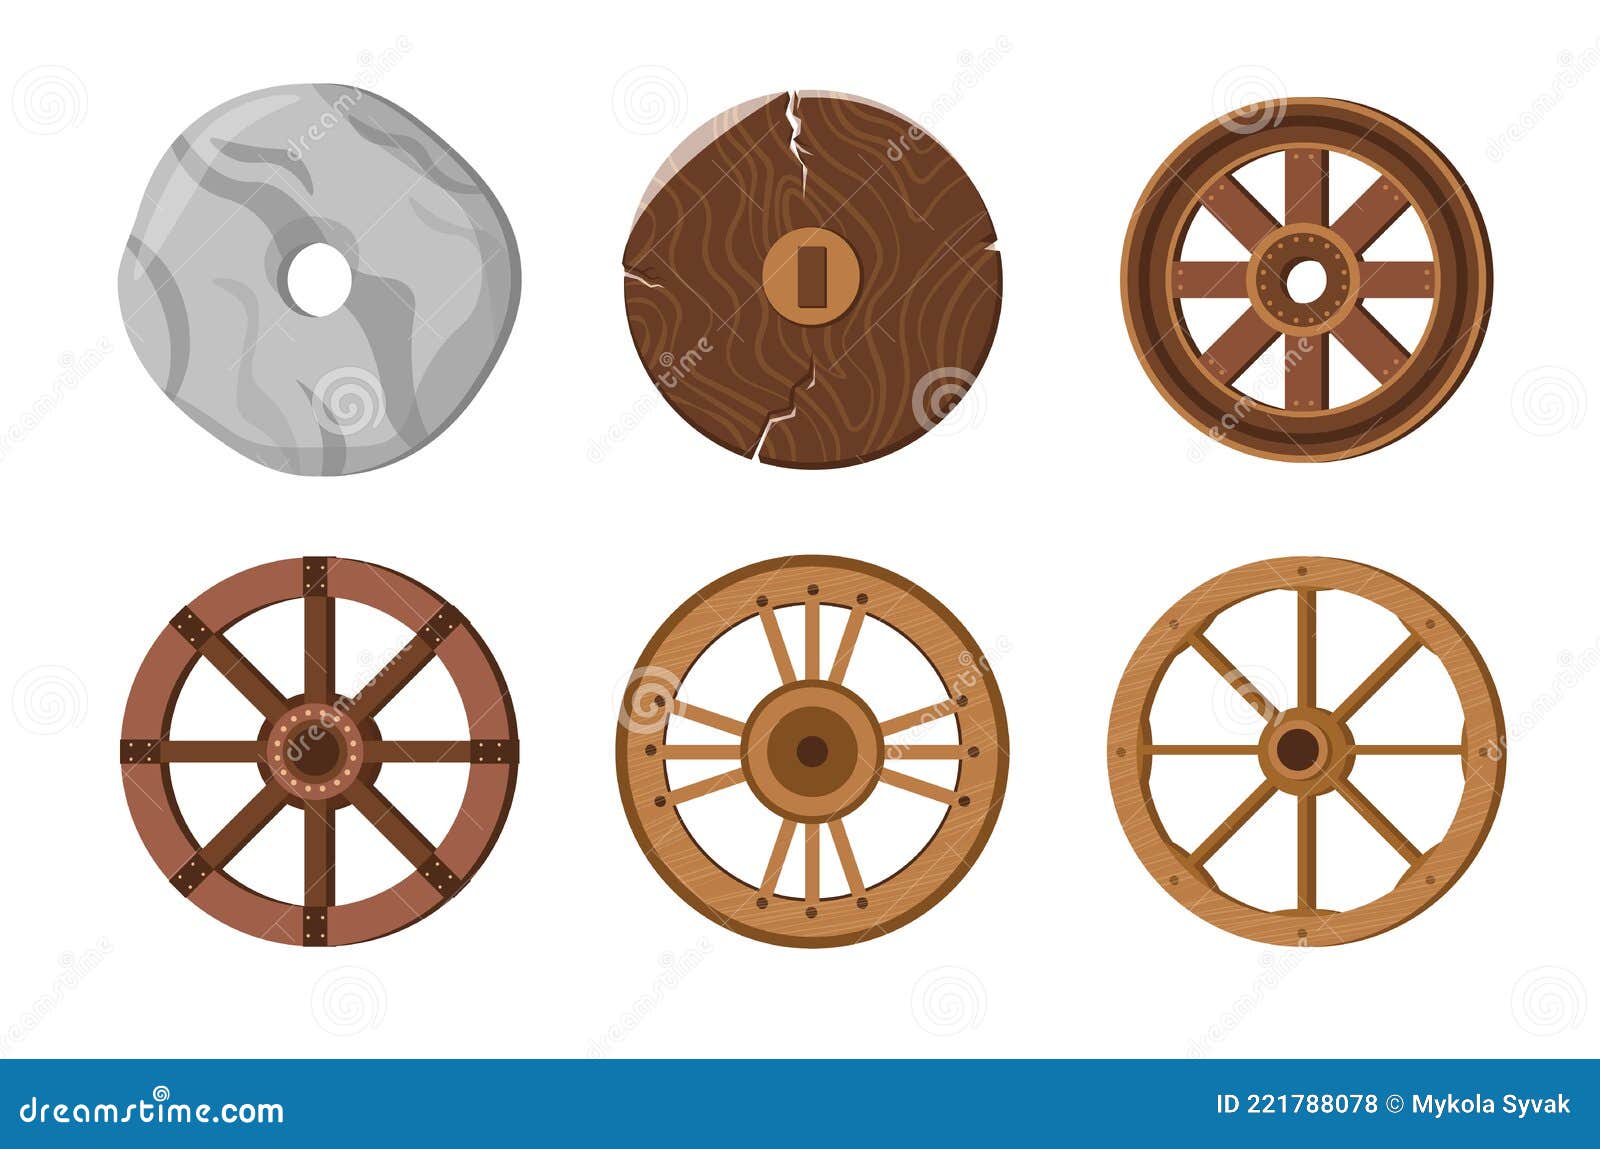 history of wheels invention